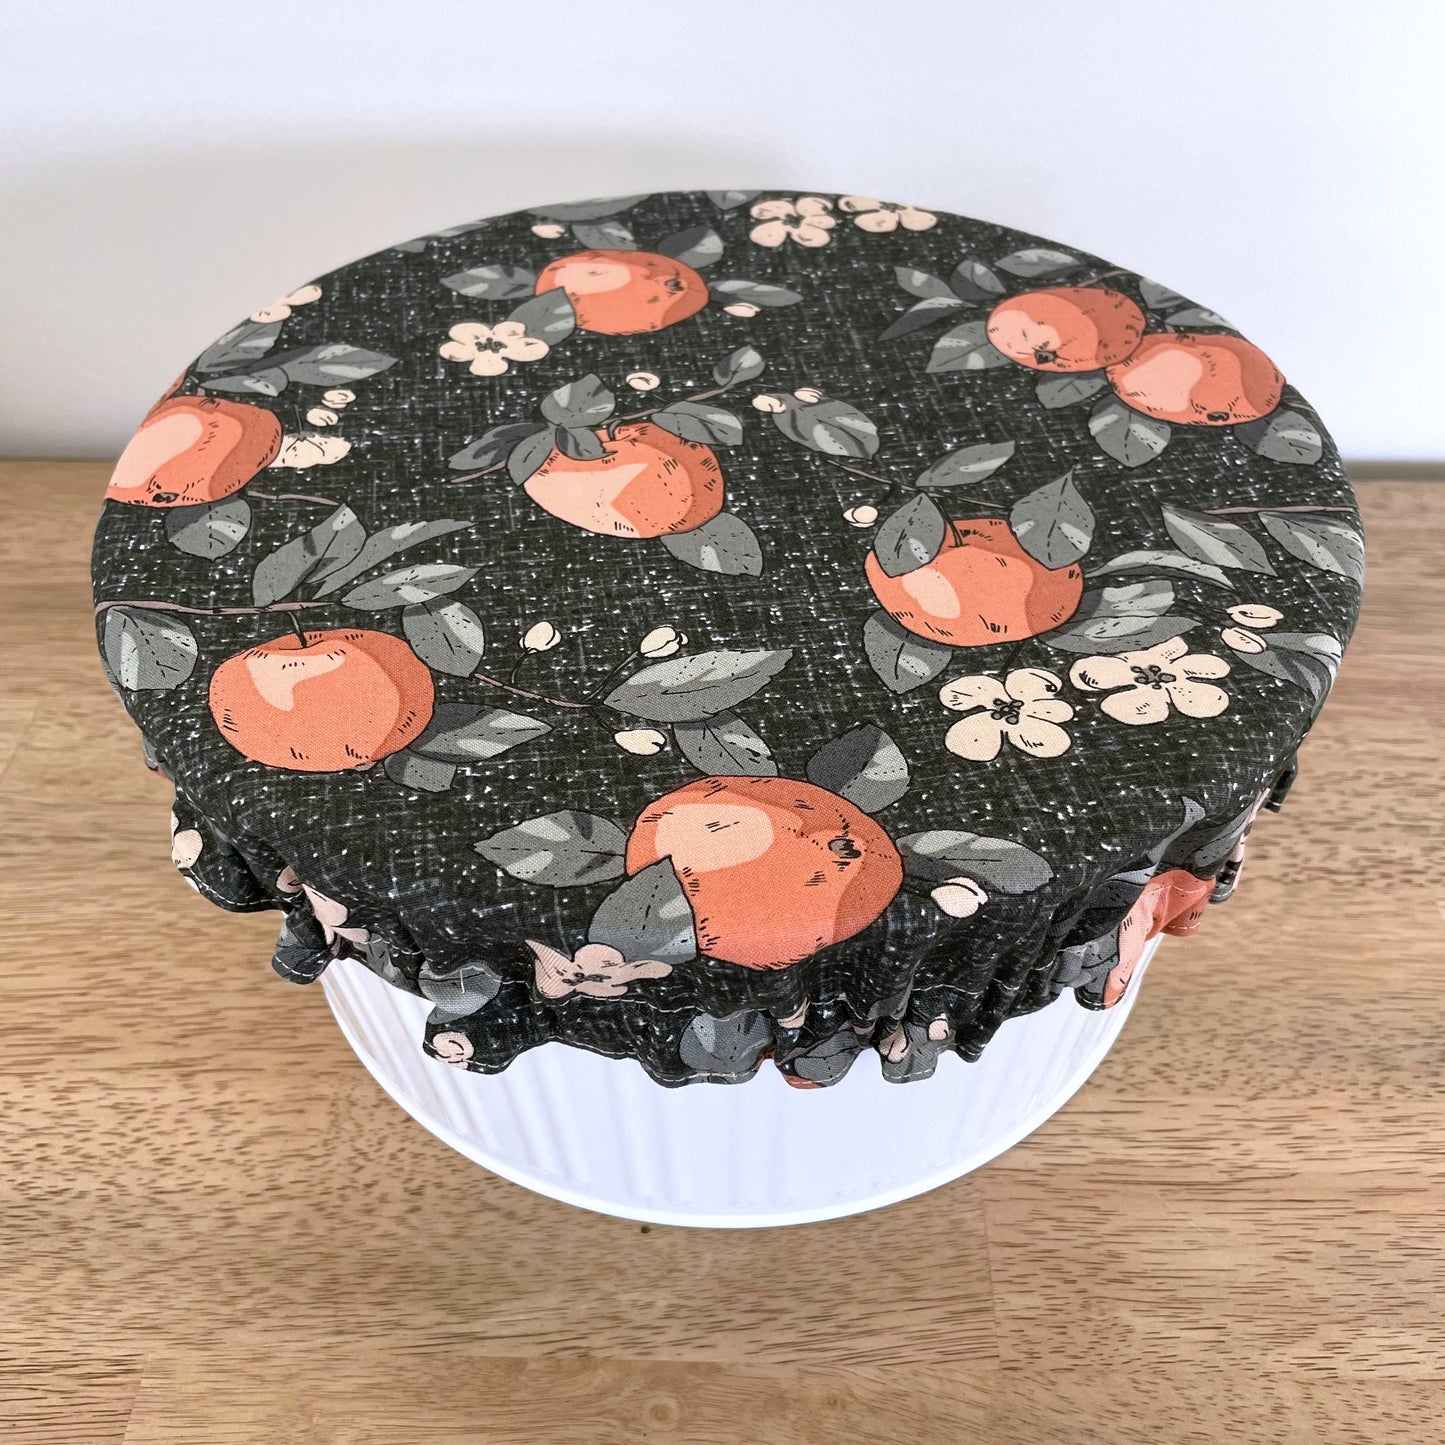 Bowl Cover featuring apples